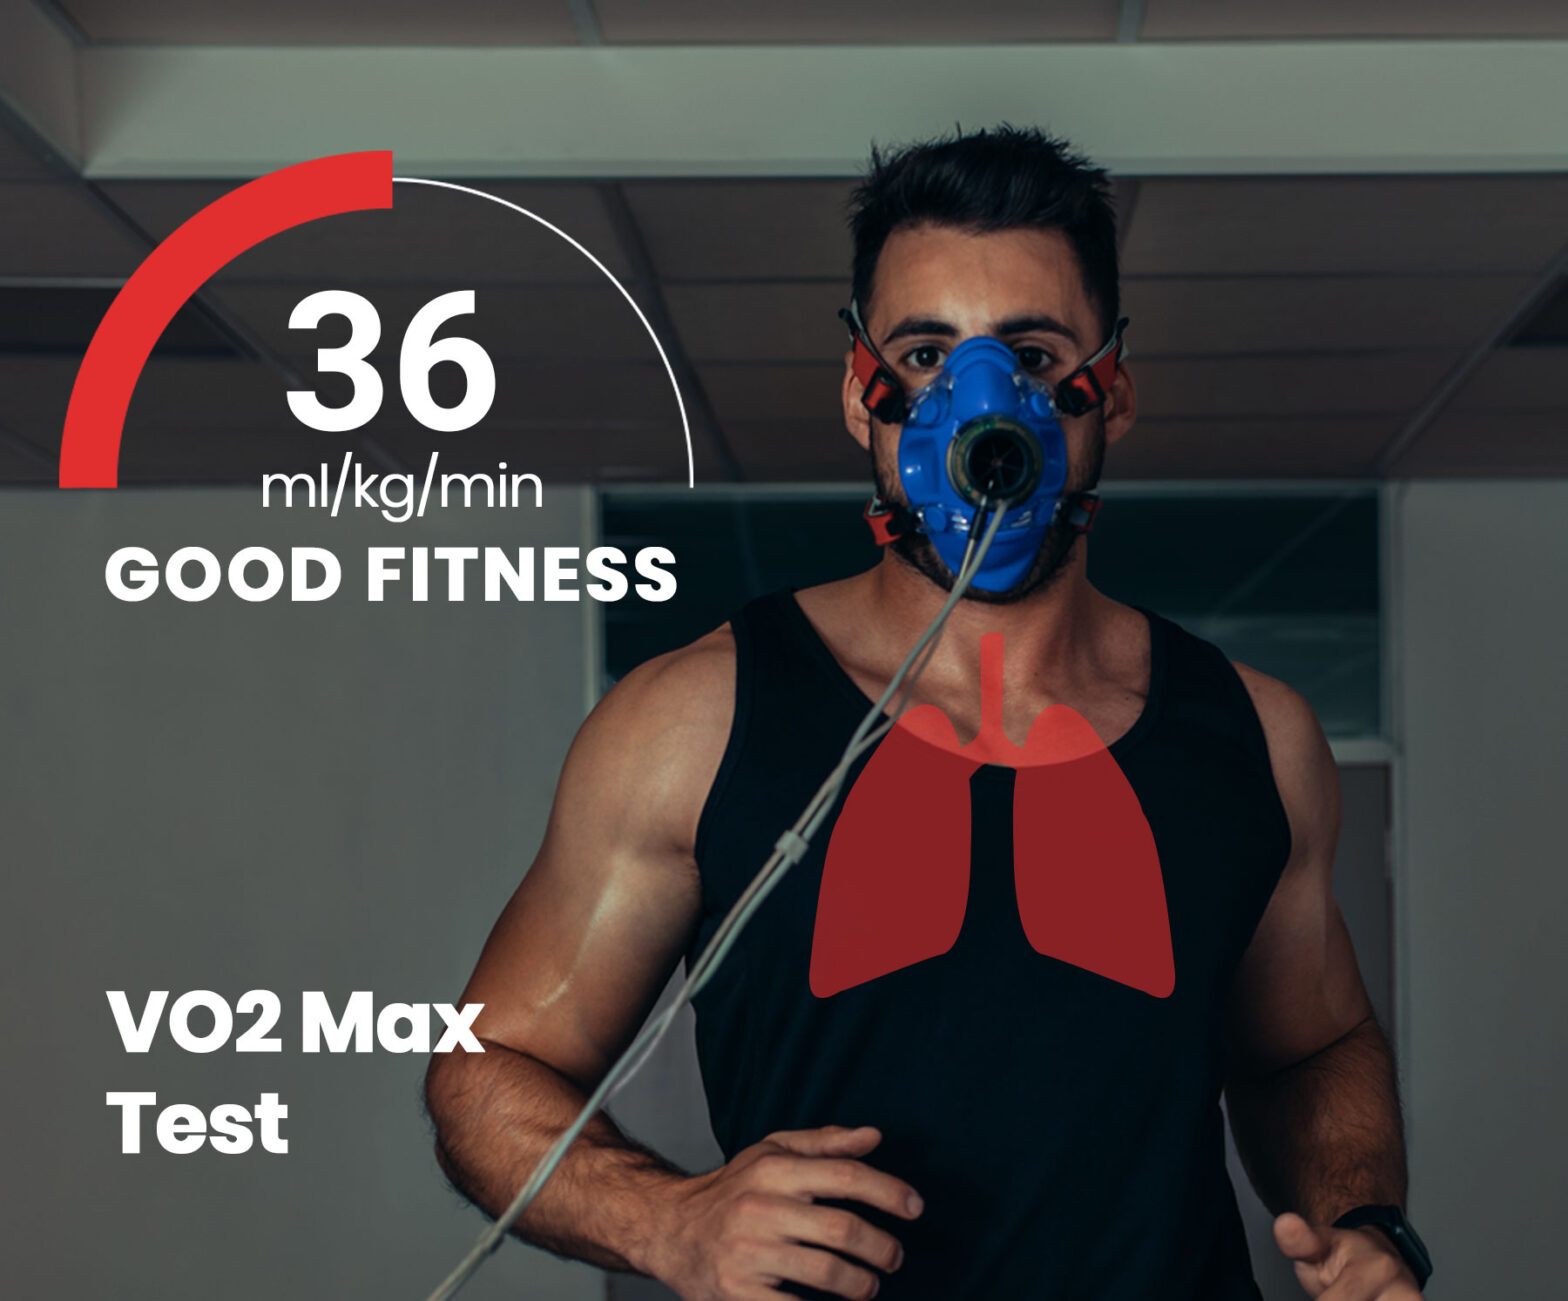 Middle-aged man doing a VO2 Max Test on a treadmill in a black tank top.